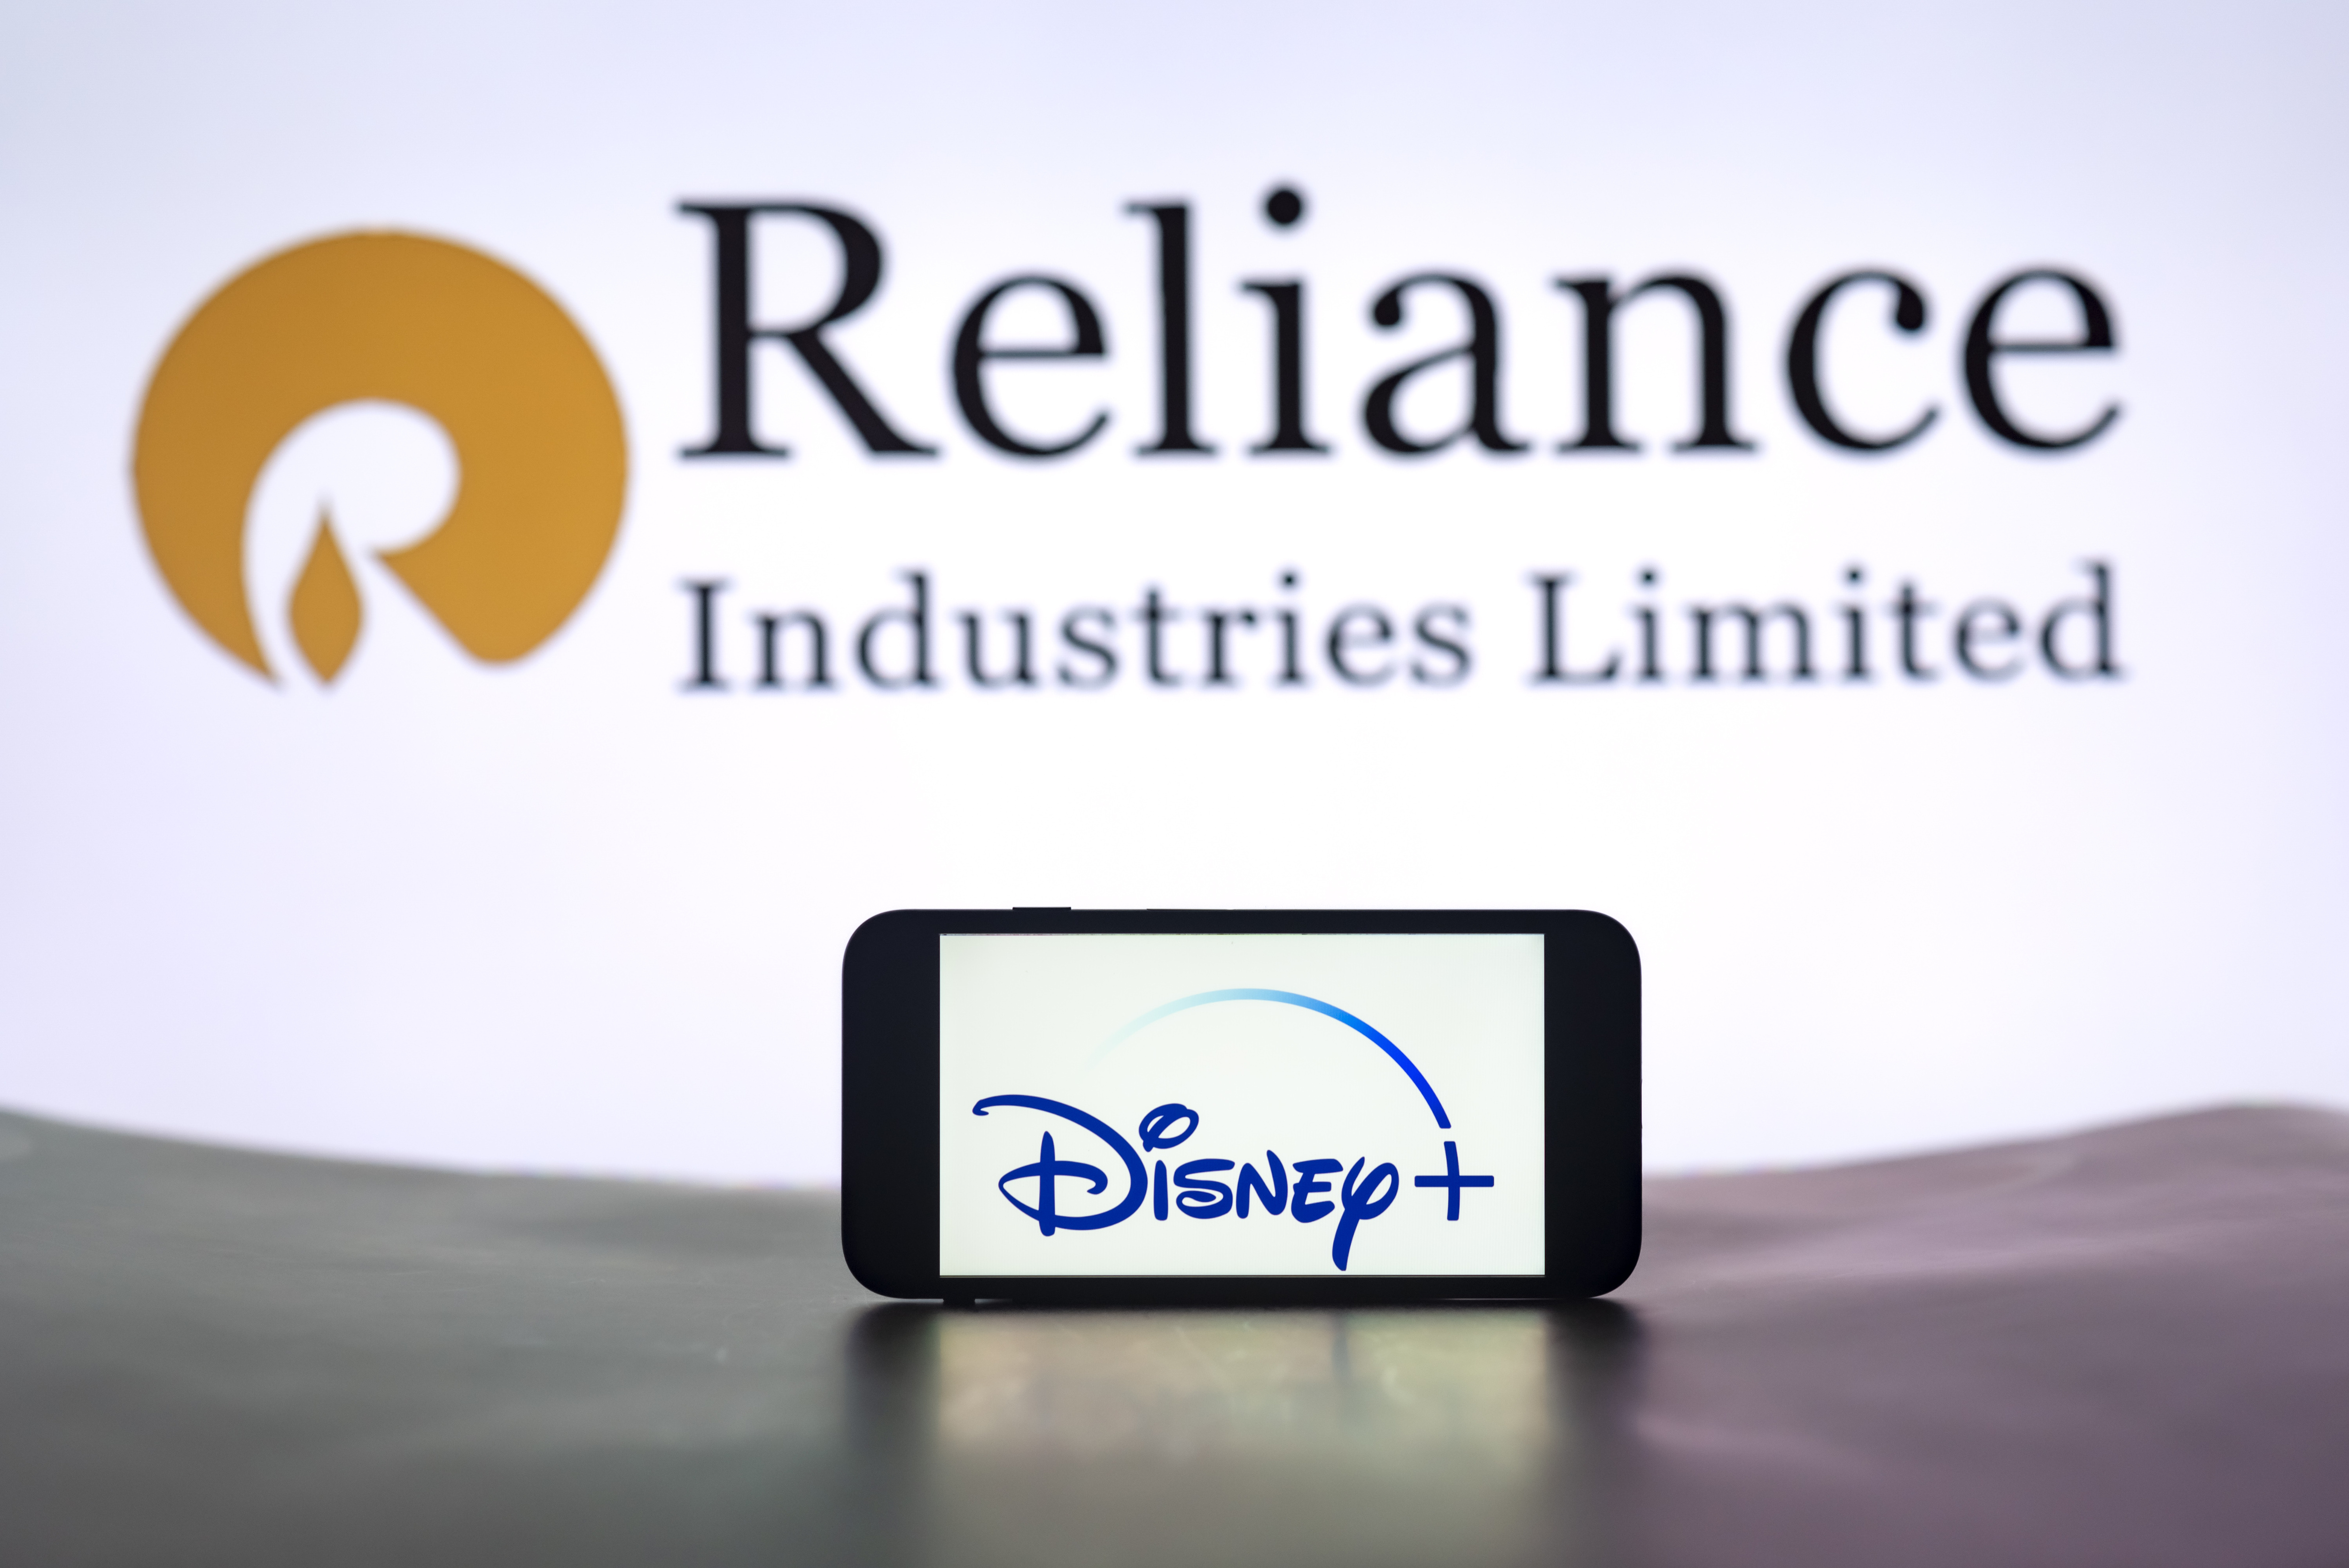 Disney, Reliance Sign .5 Billion Deal to Merge India Media Operations